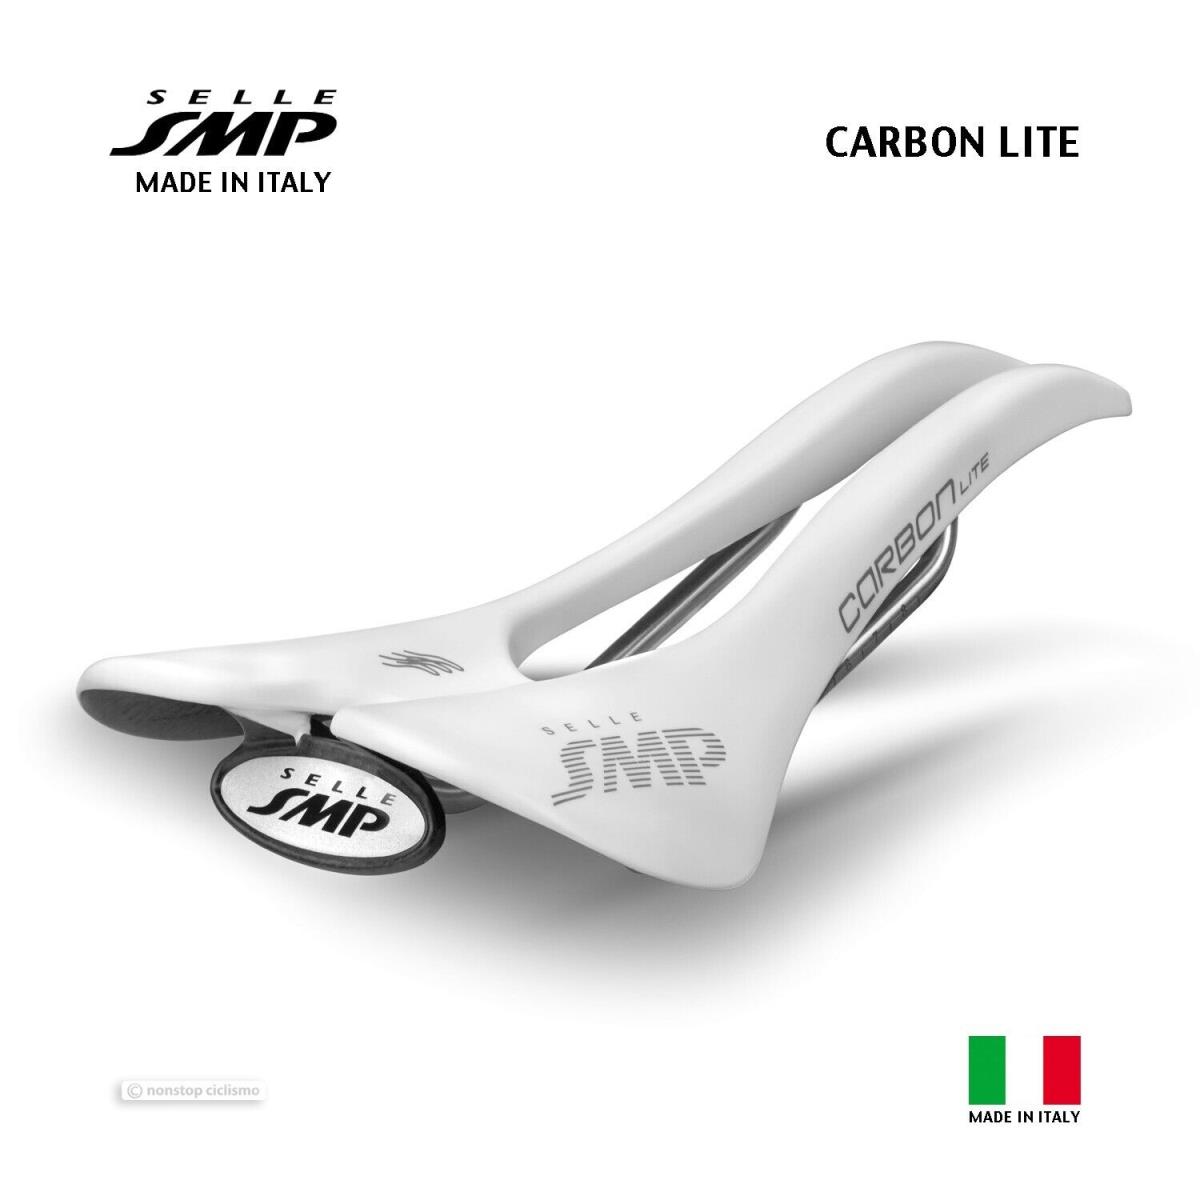 Selle Smp Carbon Lite Saddle : White- Made IN Italy